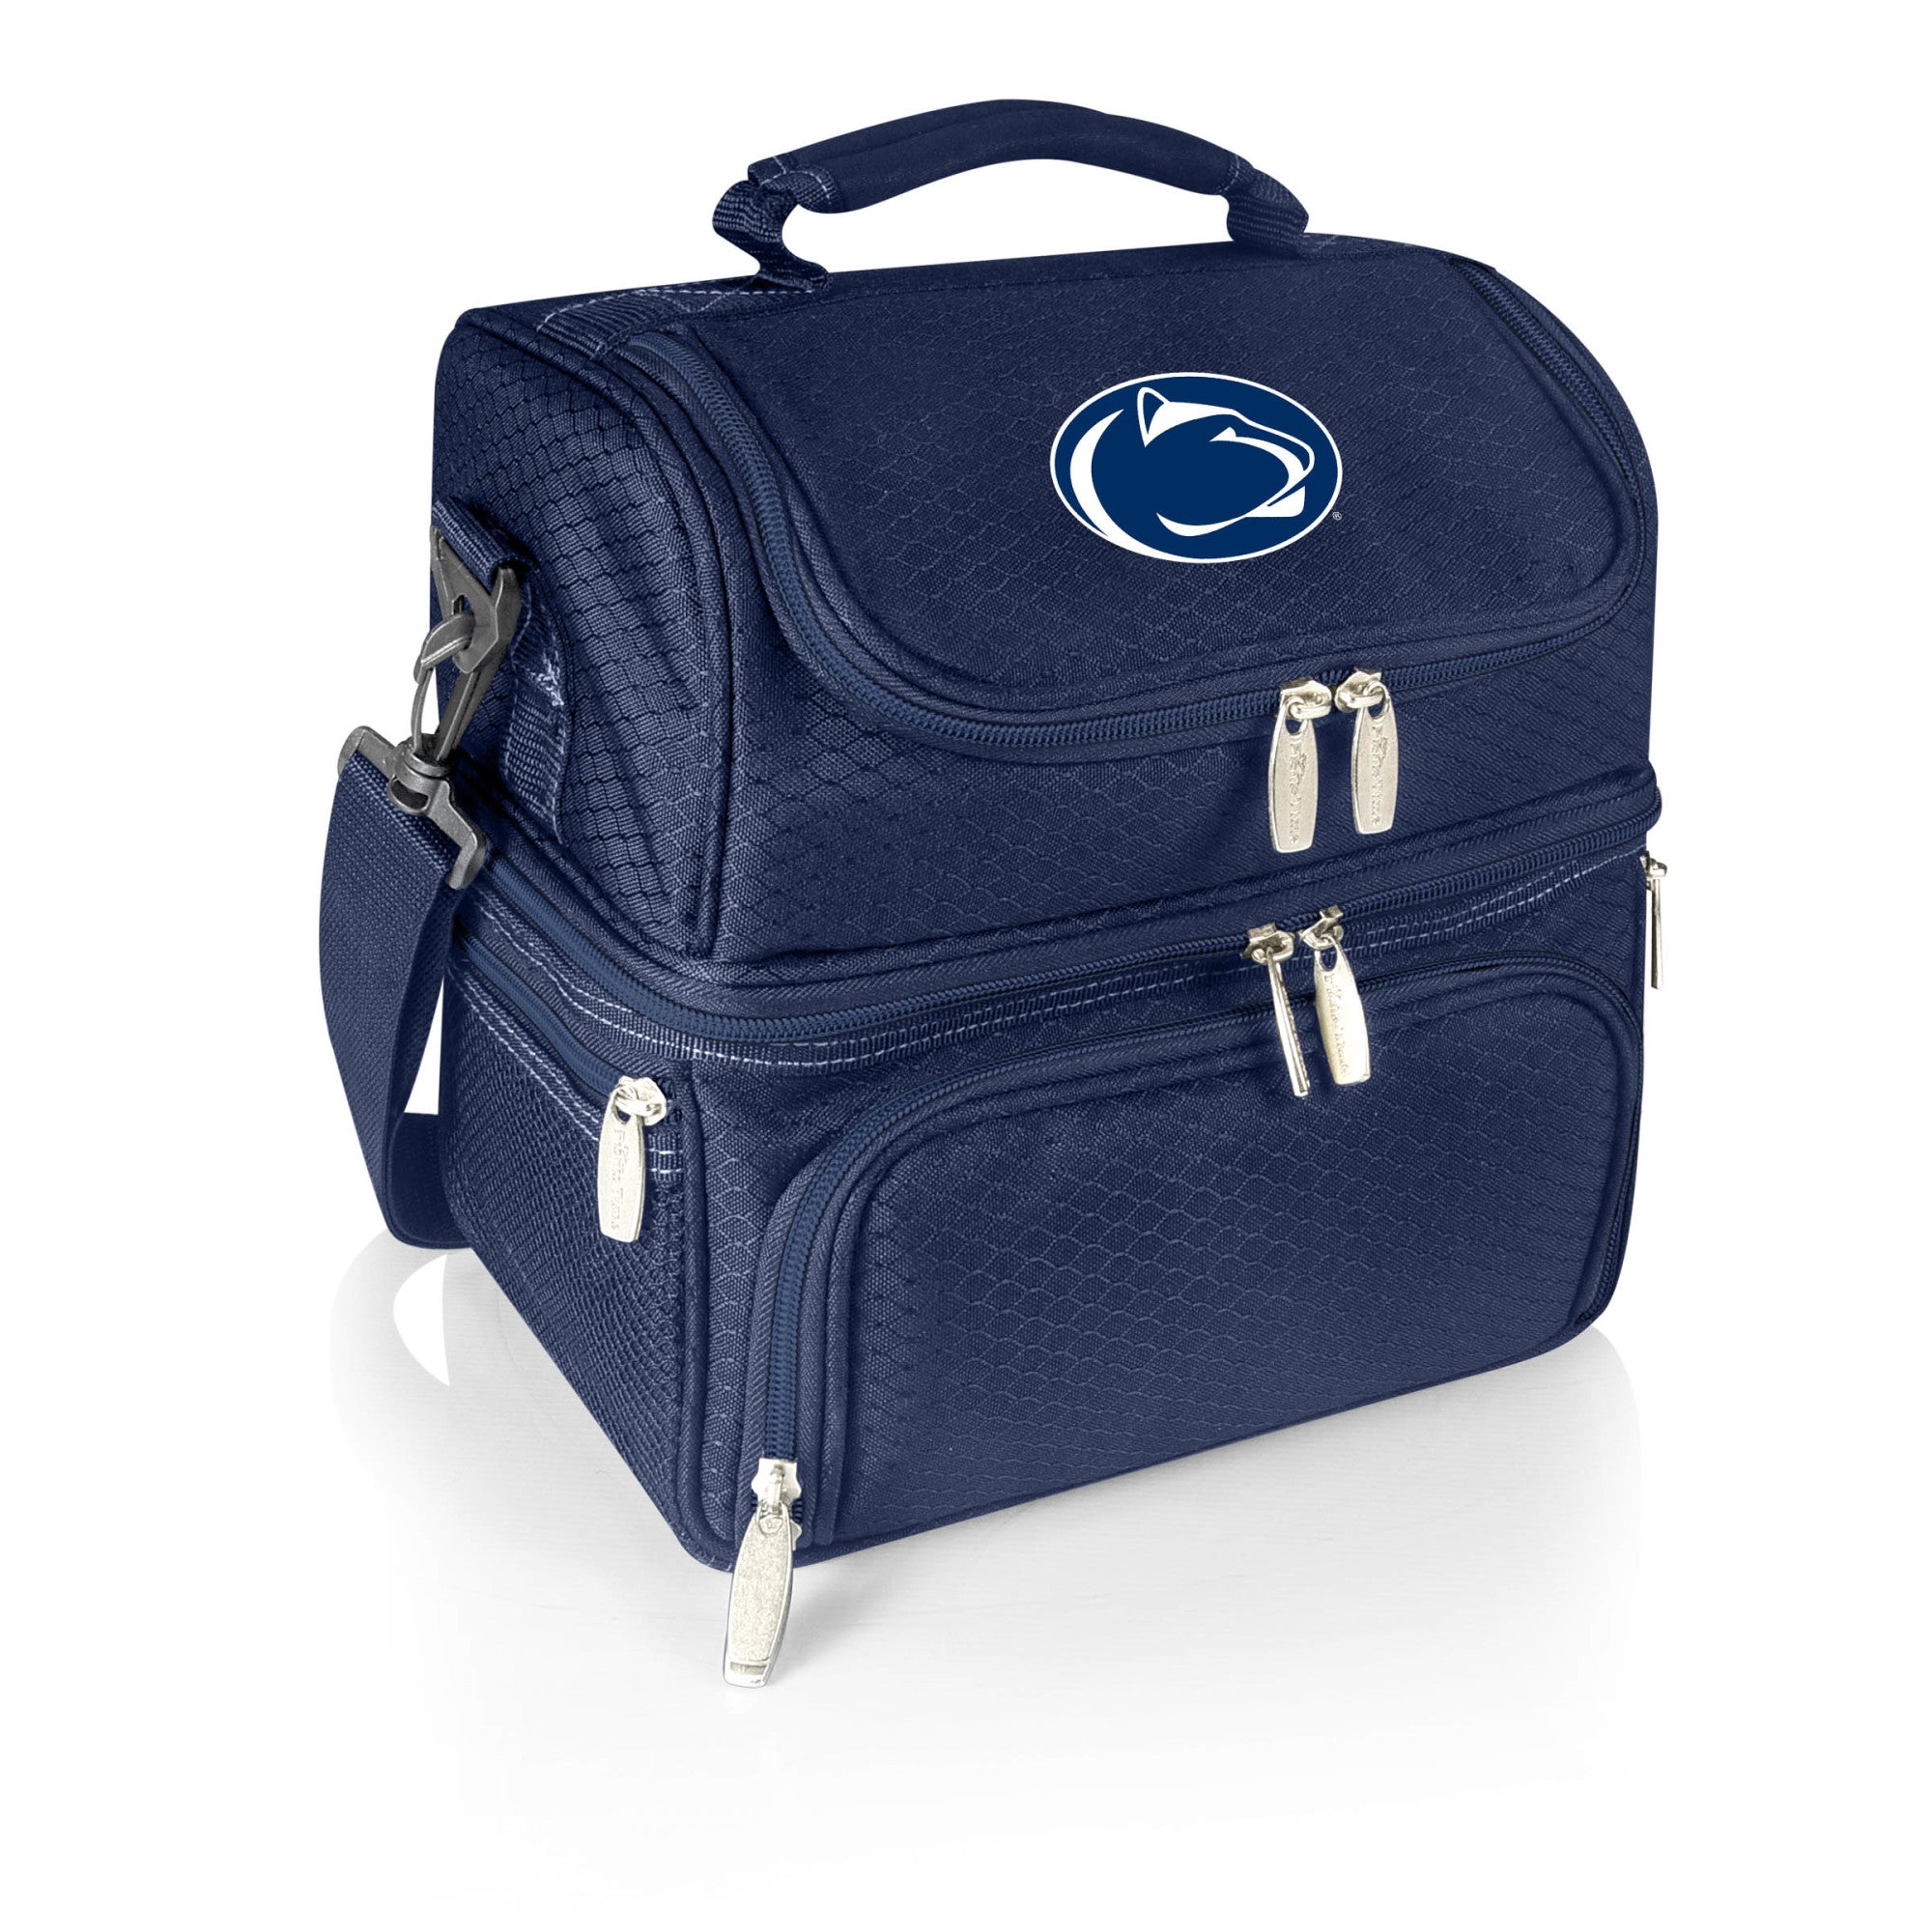 Penn State Nittany Lions - Pranzo Lunch Bag Cooler with Utensils